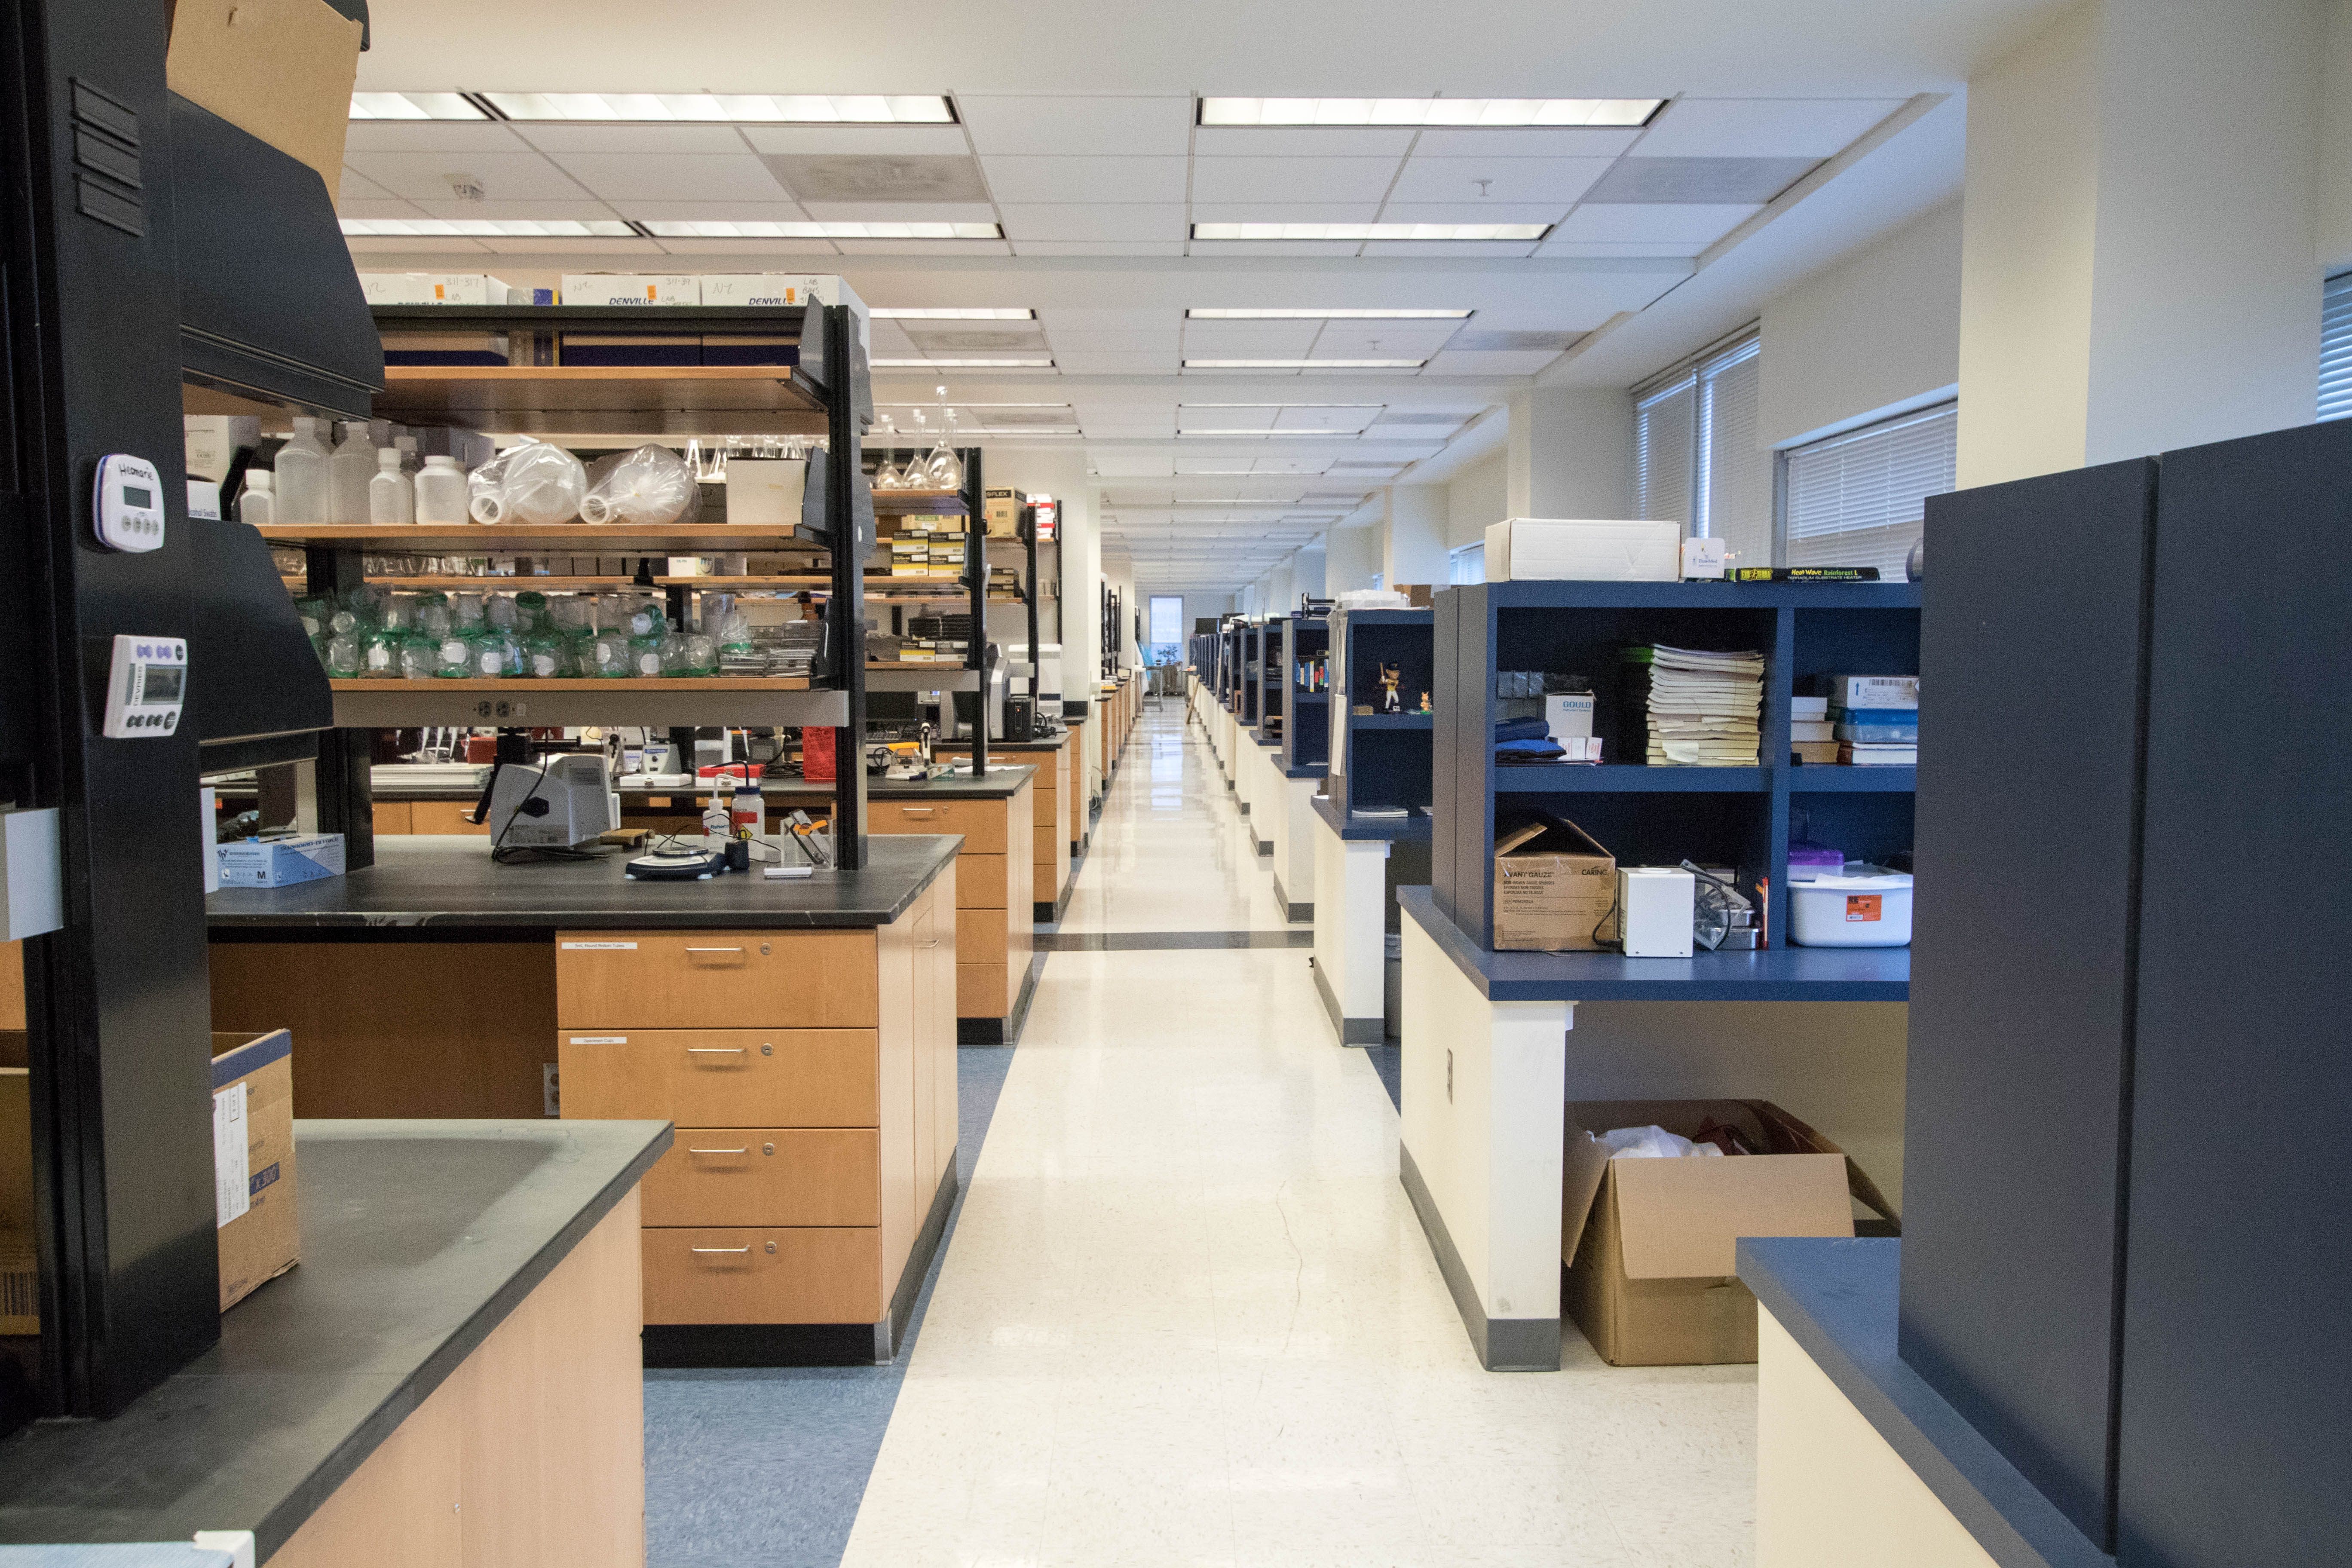 Lab benches